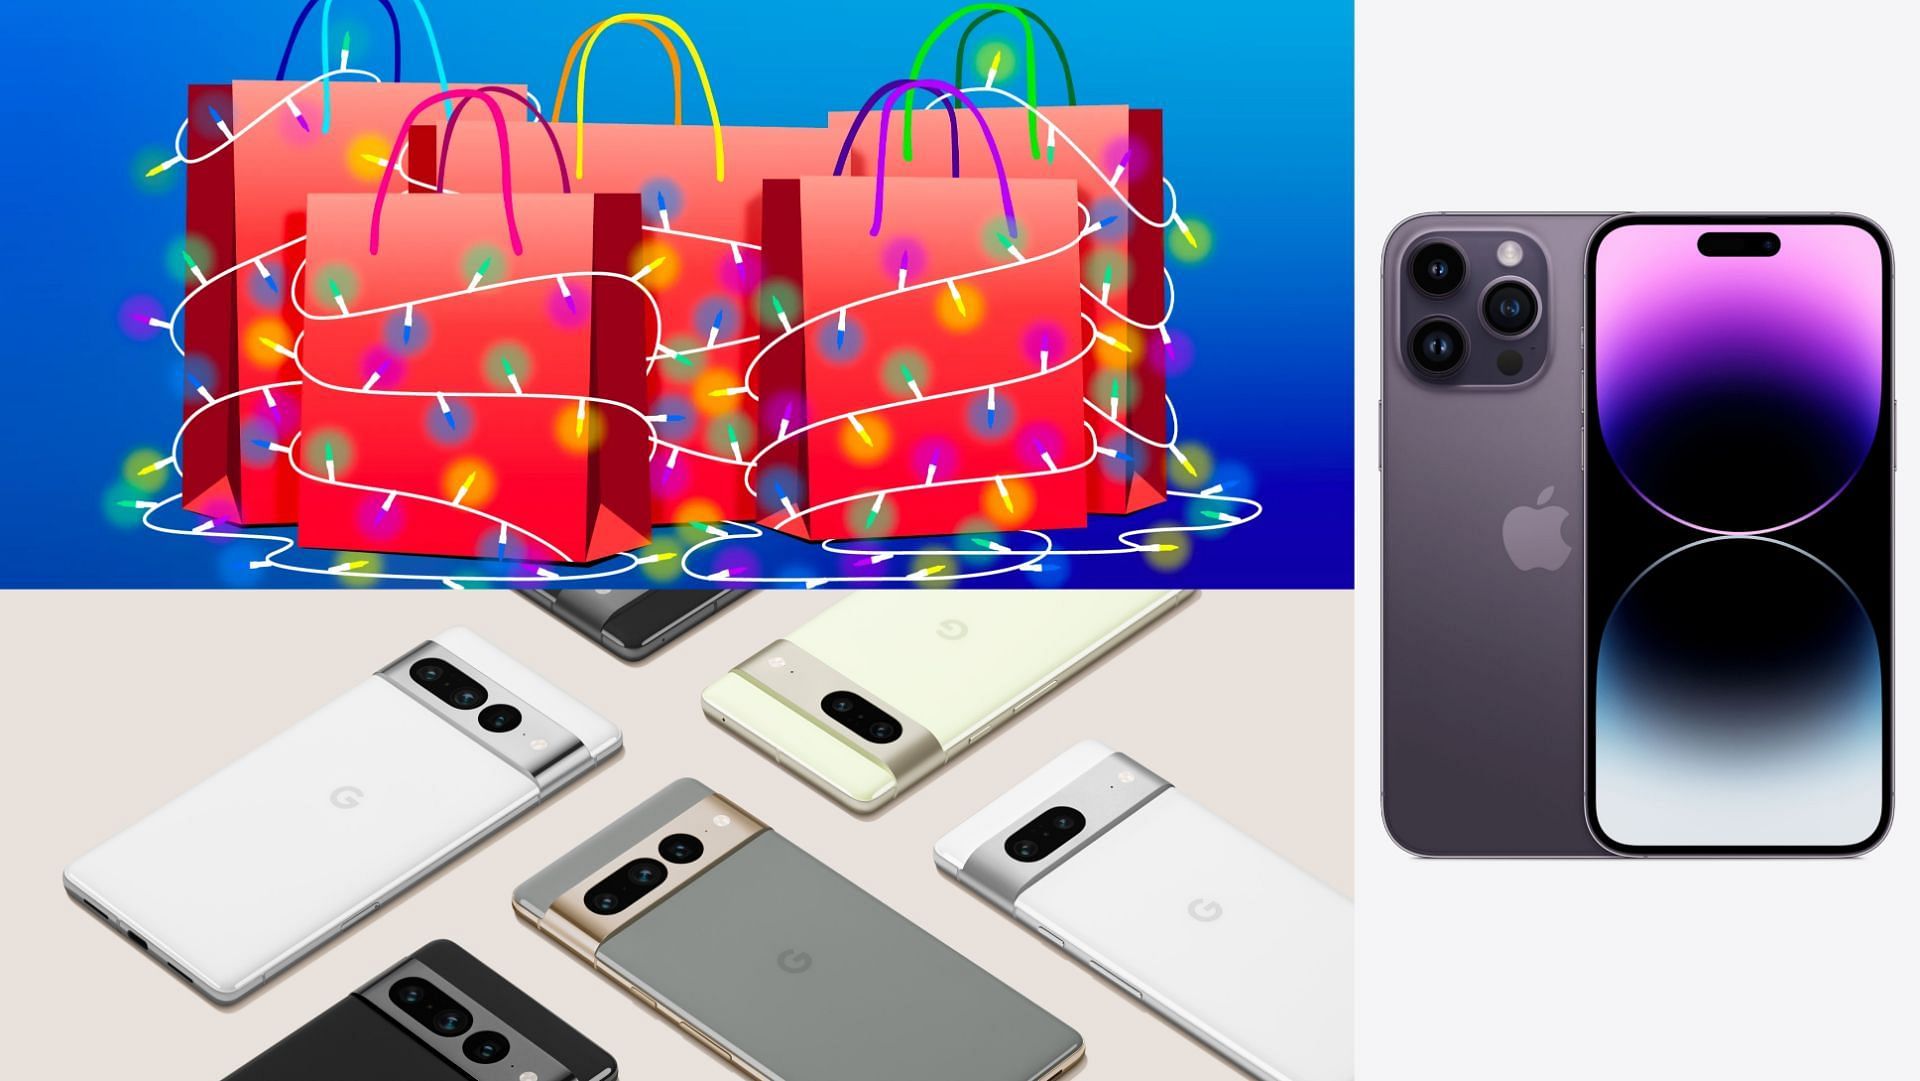 Pixel 7 Pro &amp; iPhone 14 Pro Max are top contenders for Holiday Purchase (Image by Apple and Google)